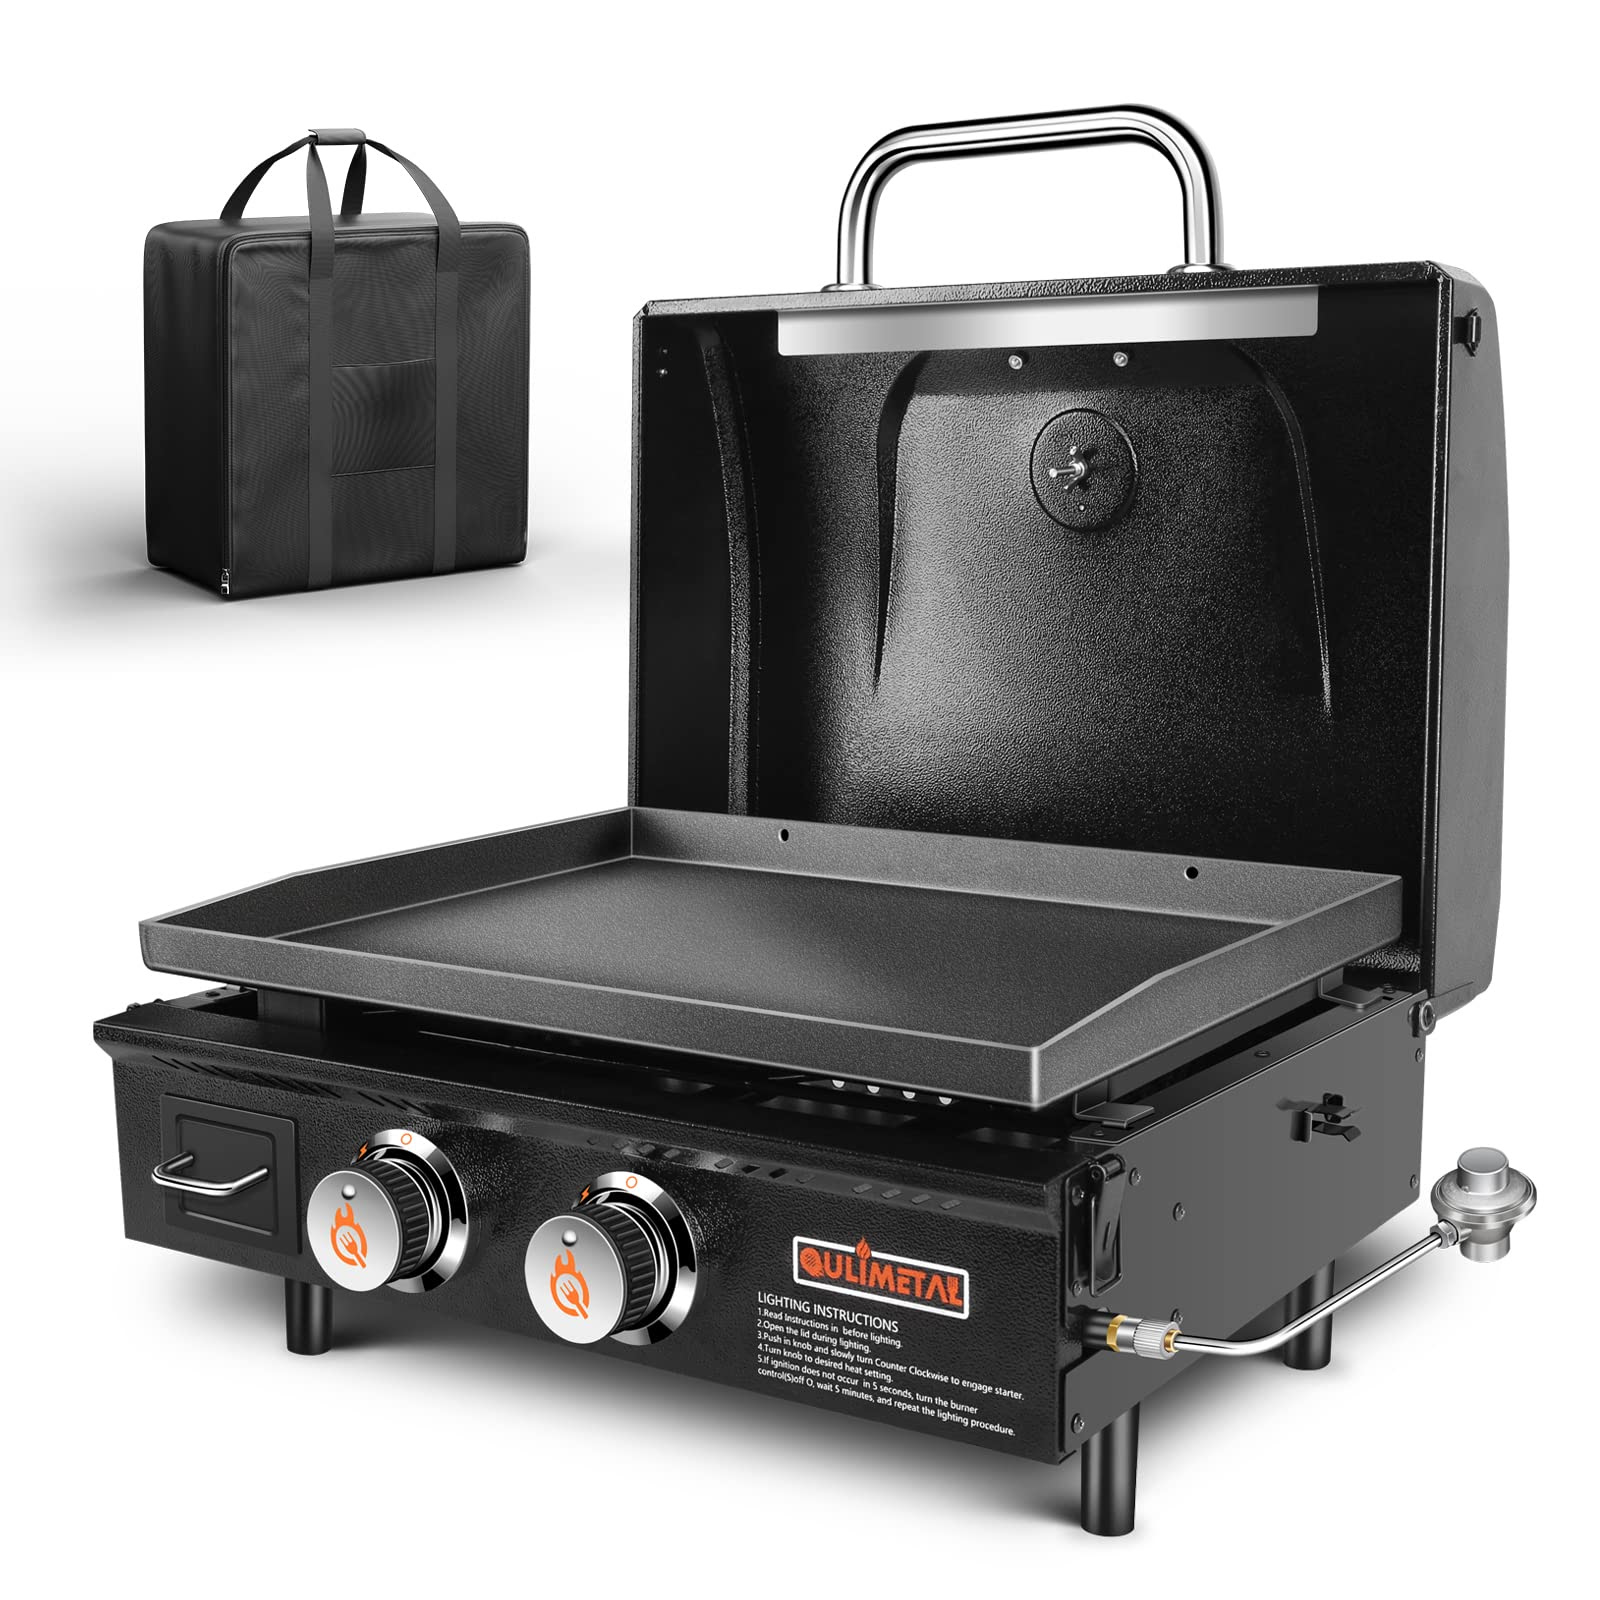 QuliMetal Table Top Grill